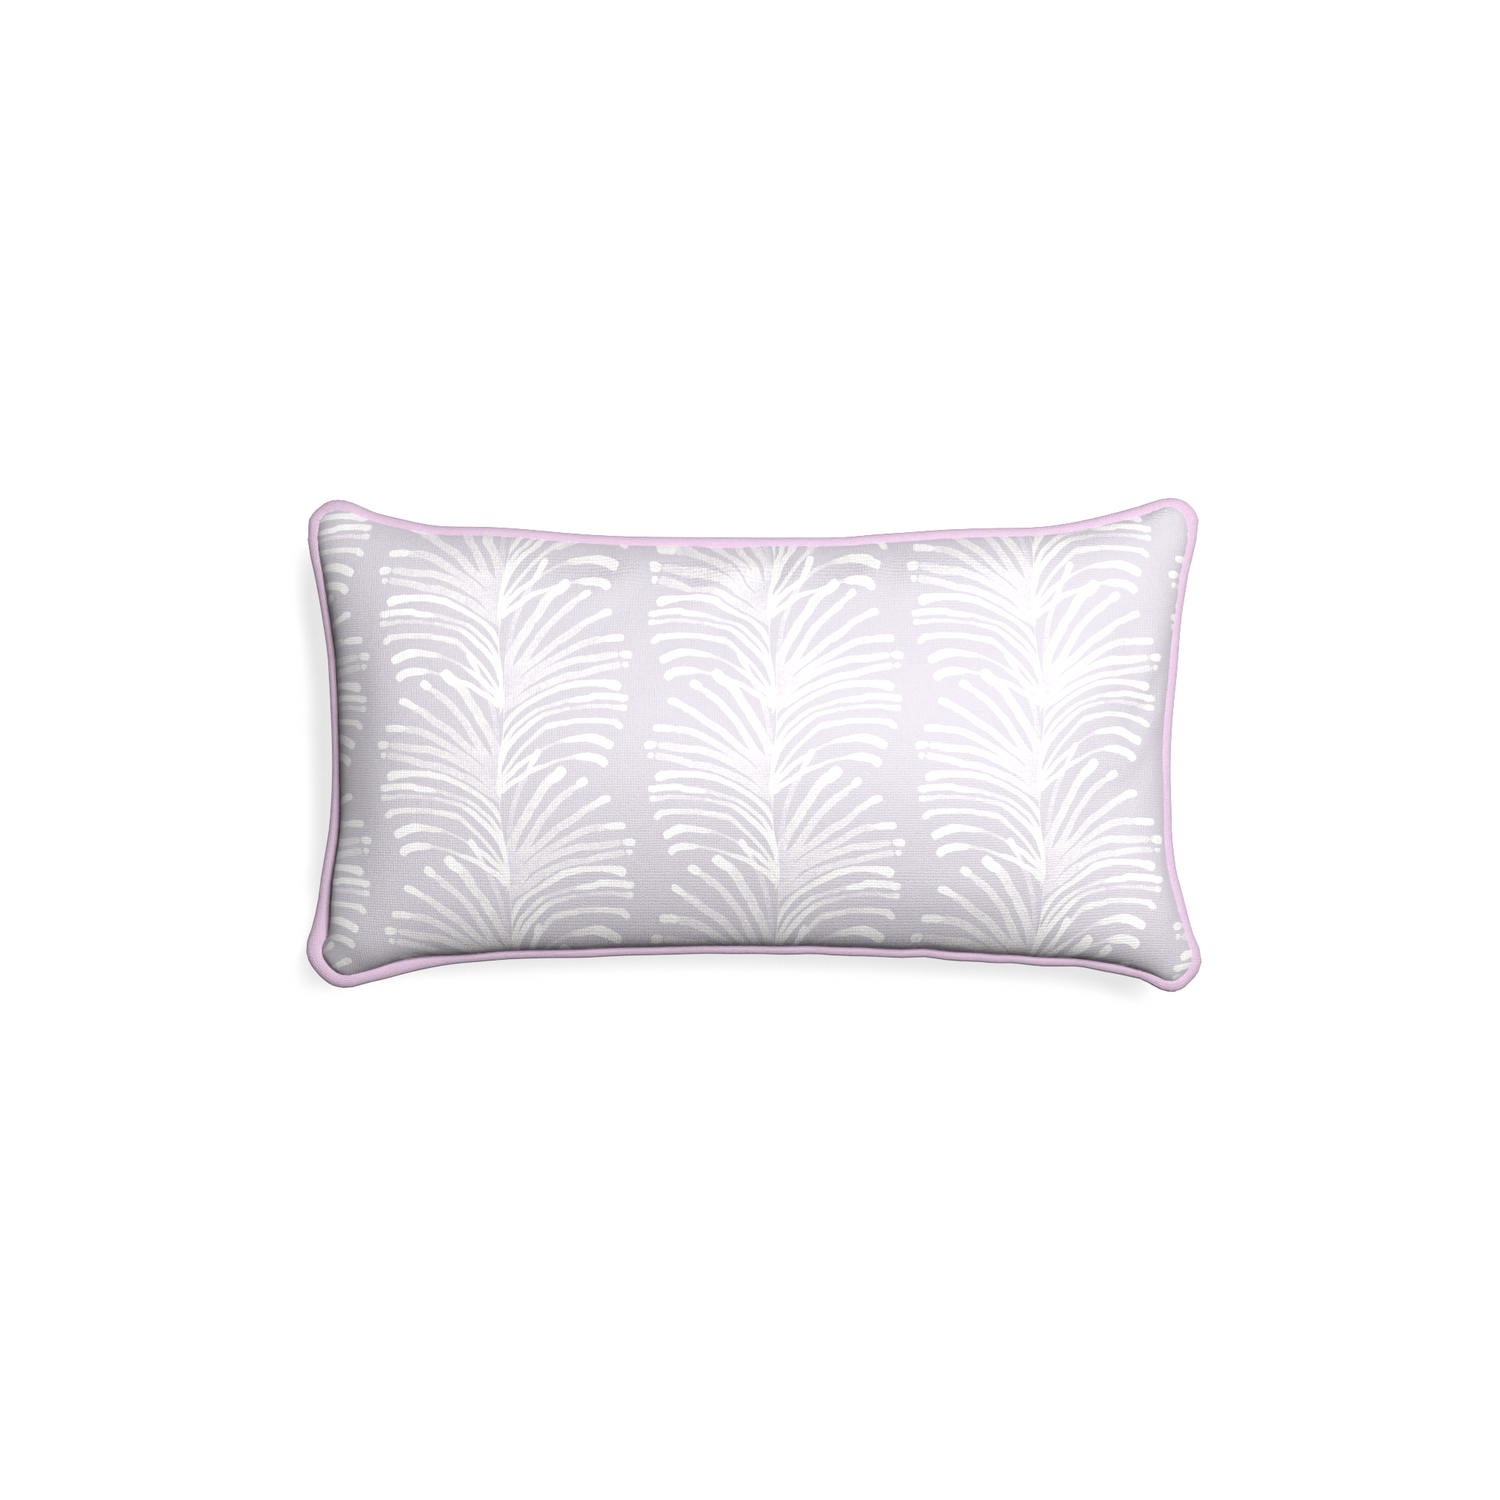 Petite-lumbar emma lavender custom lavender botanical stripepillow with l piping on white background